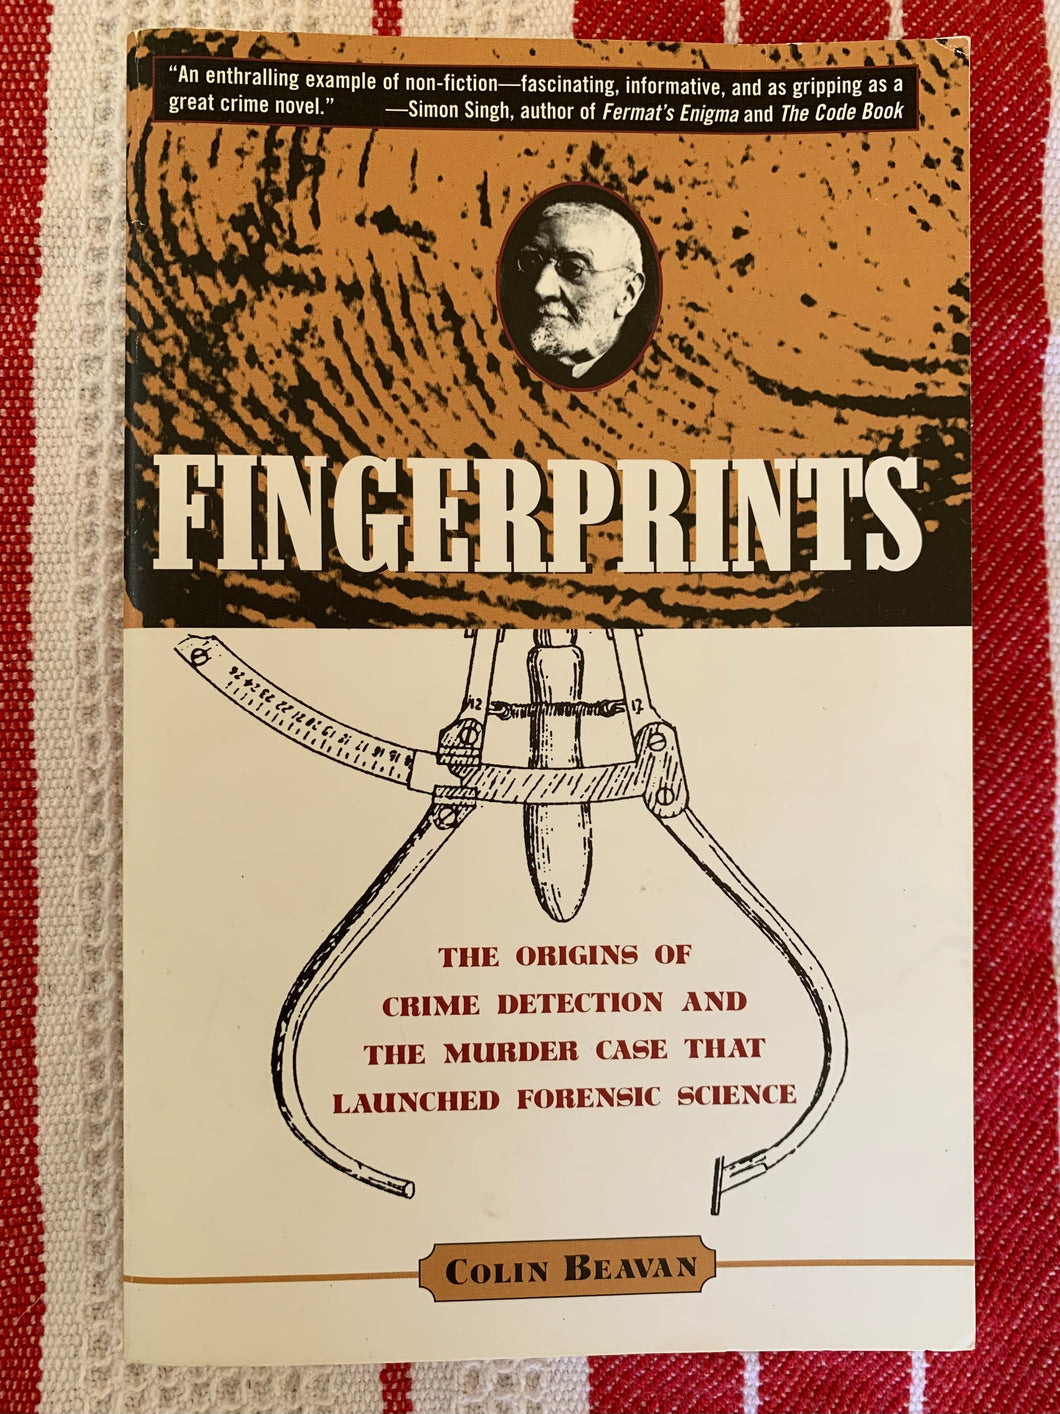 Fingerprints: The Origins Of Crime Detection And The Murder Case That Launched Forensic Science